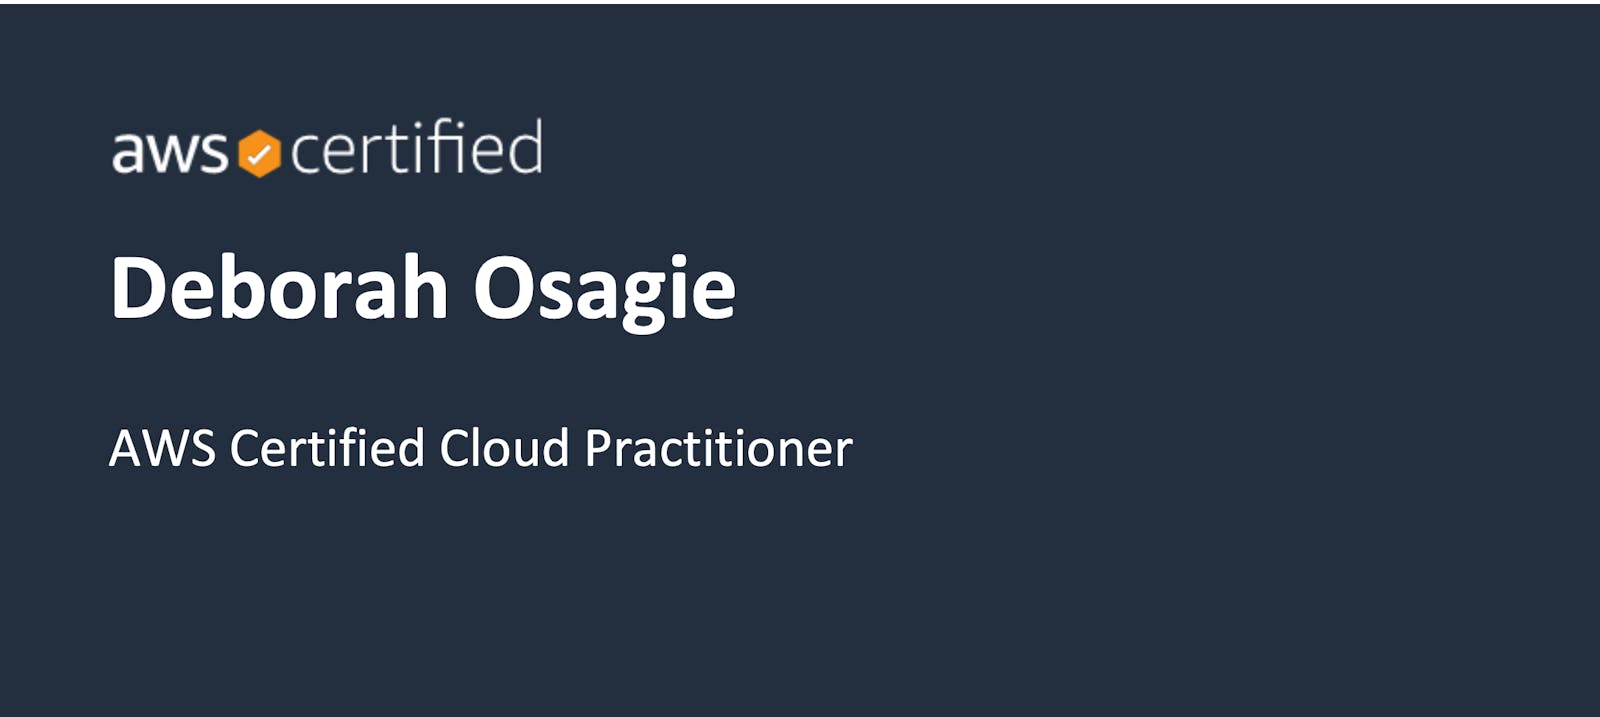 Cracking the AWS Certified Cloud Practitioner Exam: My Journey and Tips for Success.